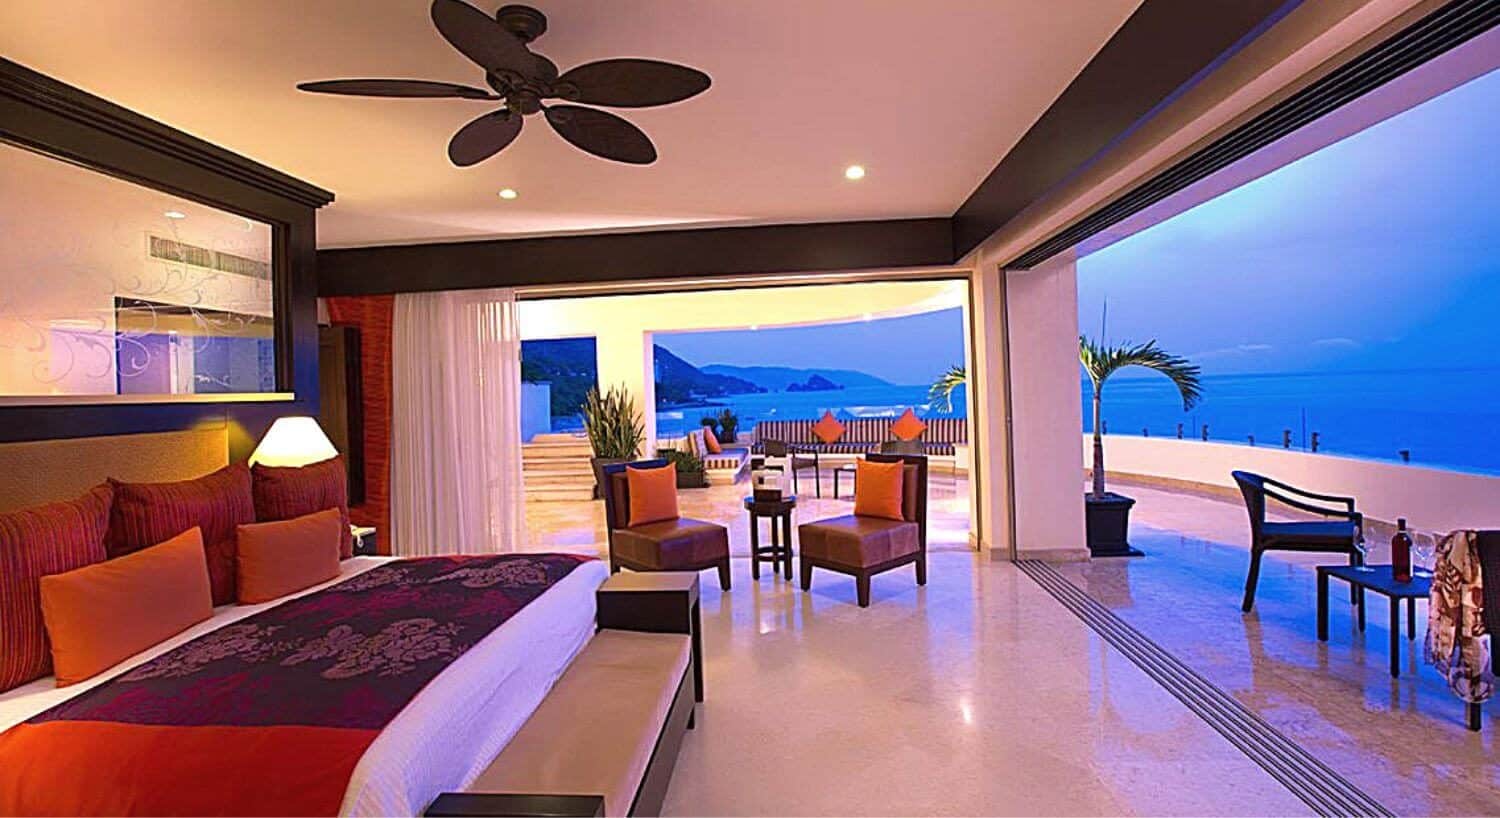 A large bedroom with a King bed, sofa, plush chairs, and open floor to ceiling windows on two sides that open to a wrap around balcony featuring outdoor living area and stunning views of the ocean and mountains.